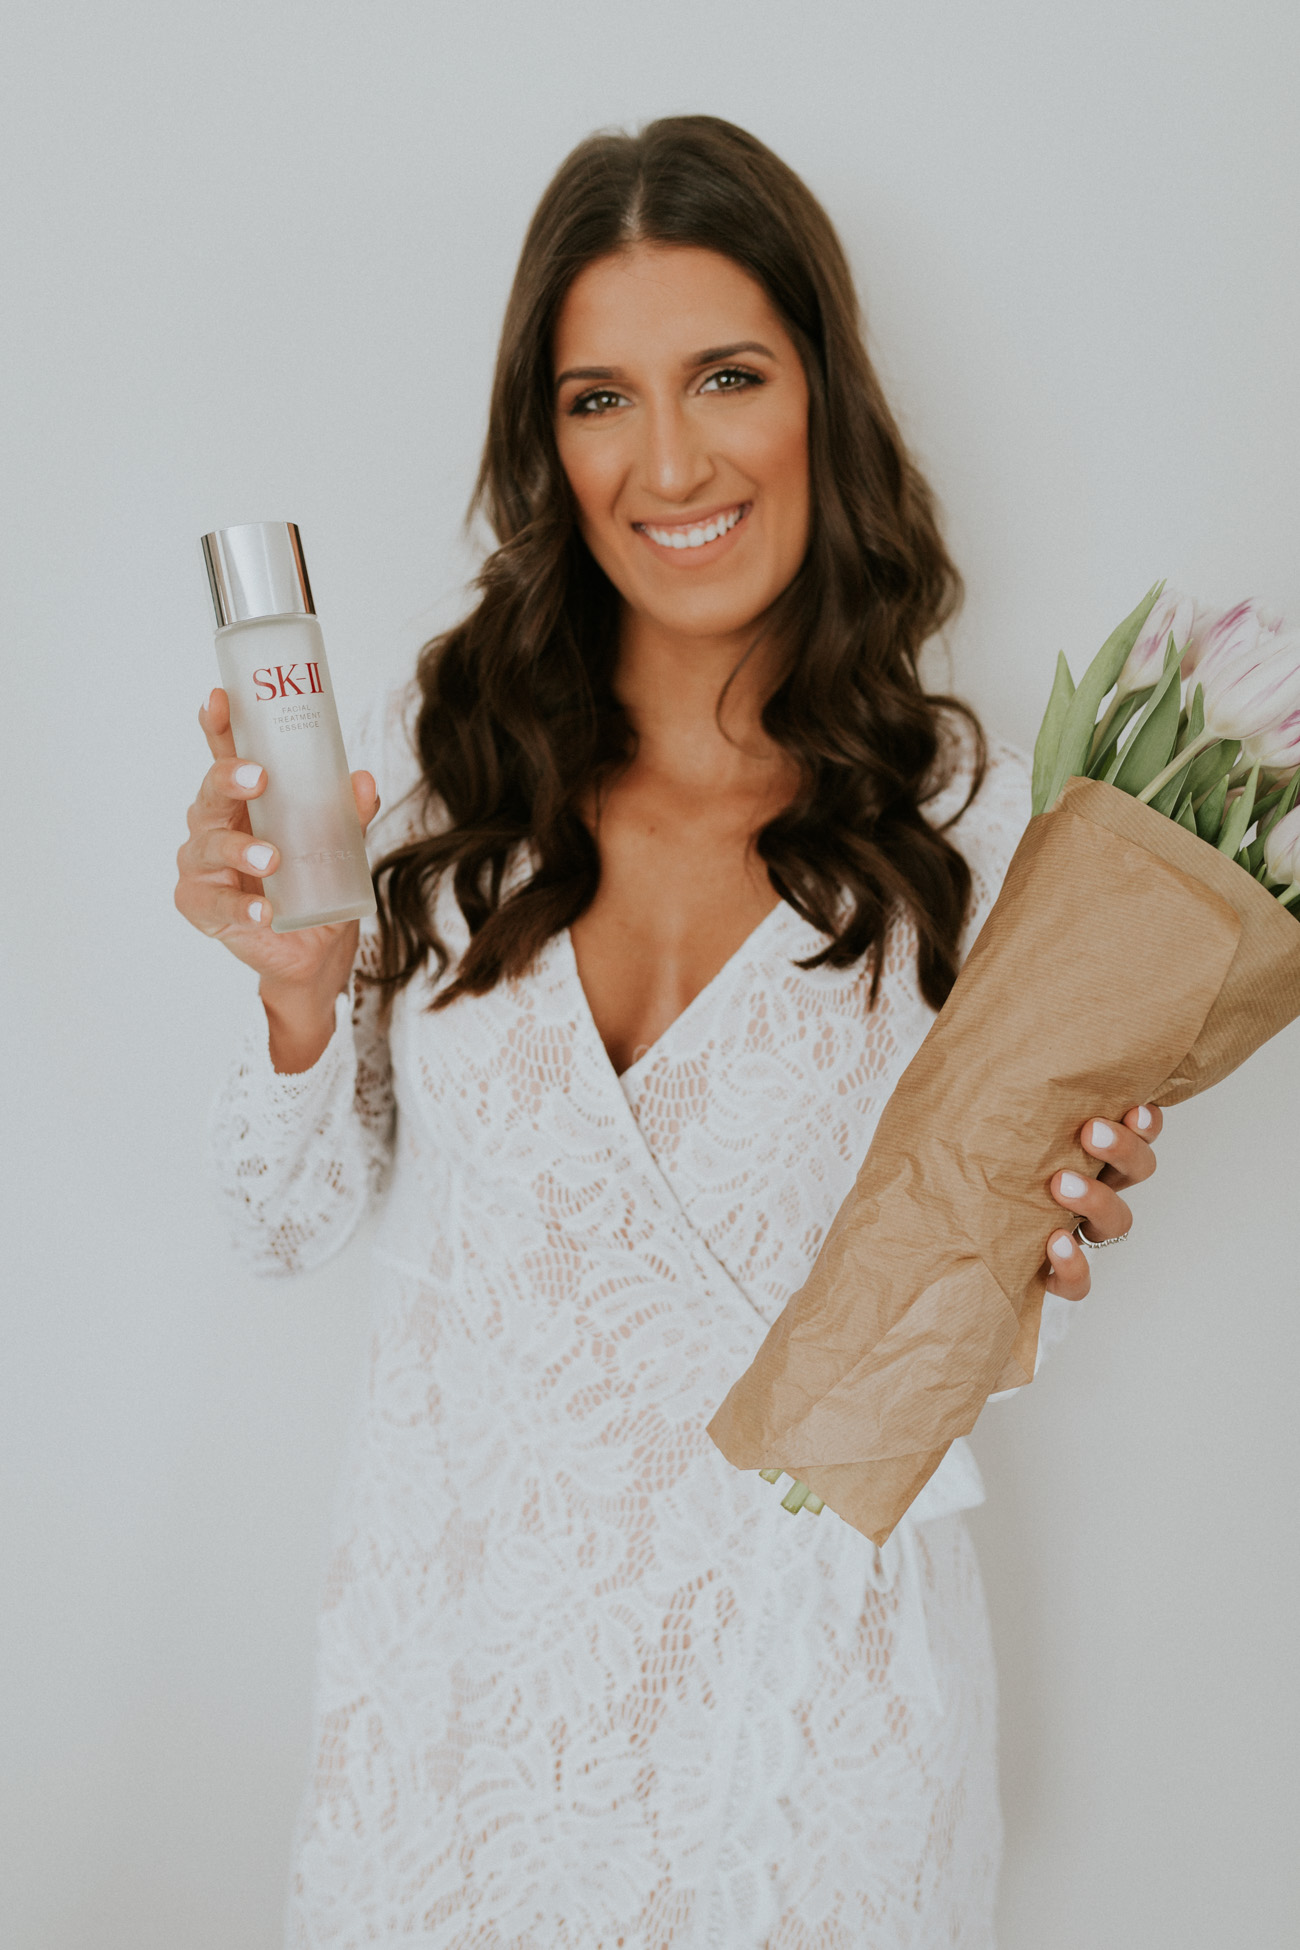 skii miracle water, skii facial treatment essence, bridal shower outfit bridal shower style, skin routine, skincare routine, white lace romper, beauty transformation, skin care transformation, ski-ii facial treatment essence // grace wainwright a southern drawl